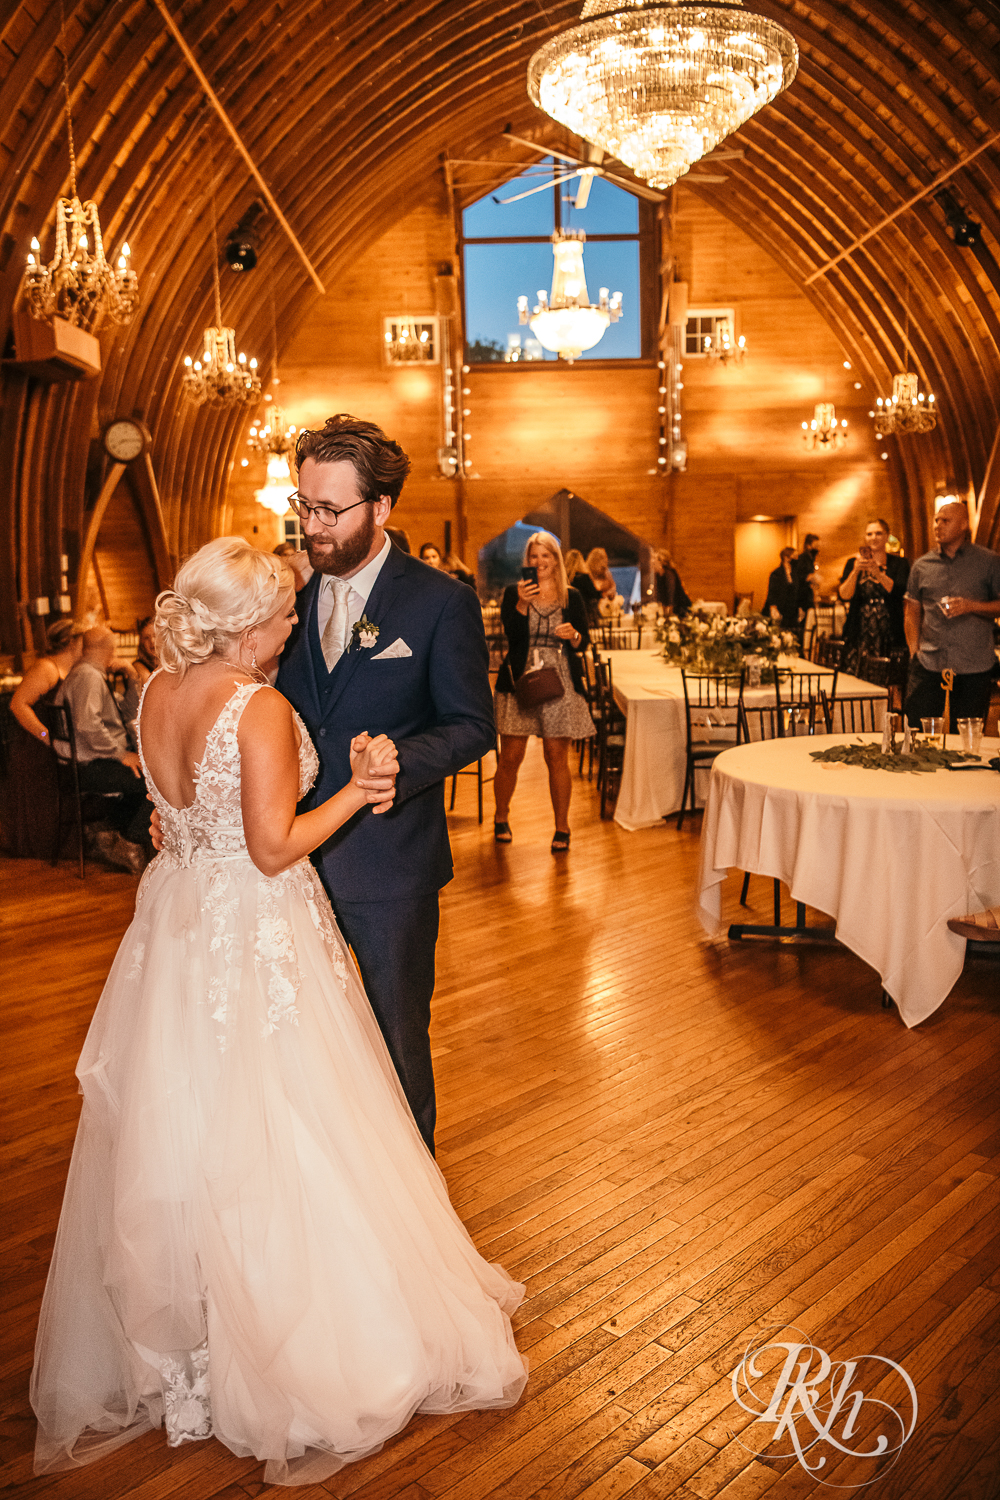 Bride and groom dance during wedding reception at Green Acres Event Center in Eden Prairie, Minnesota.